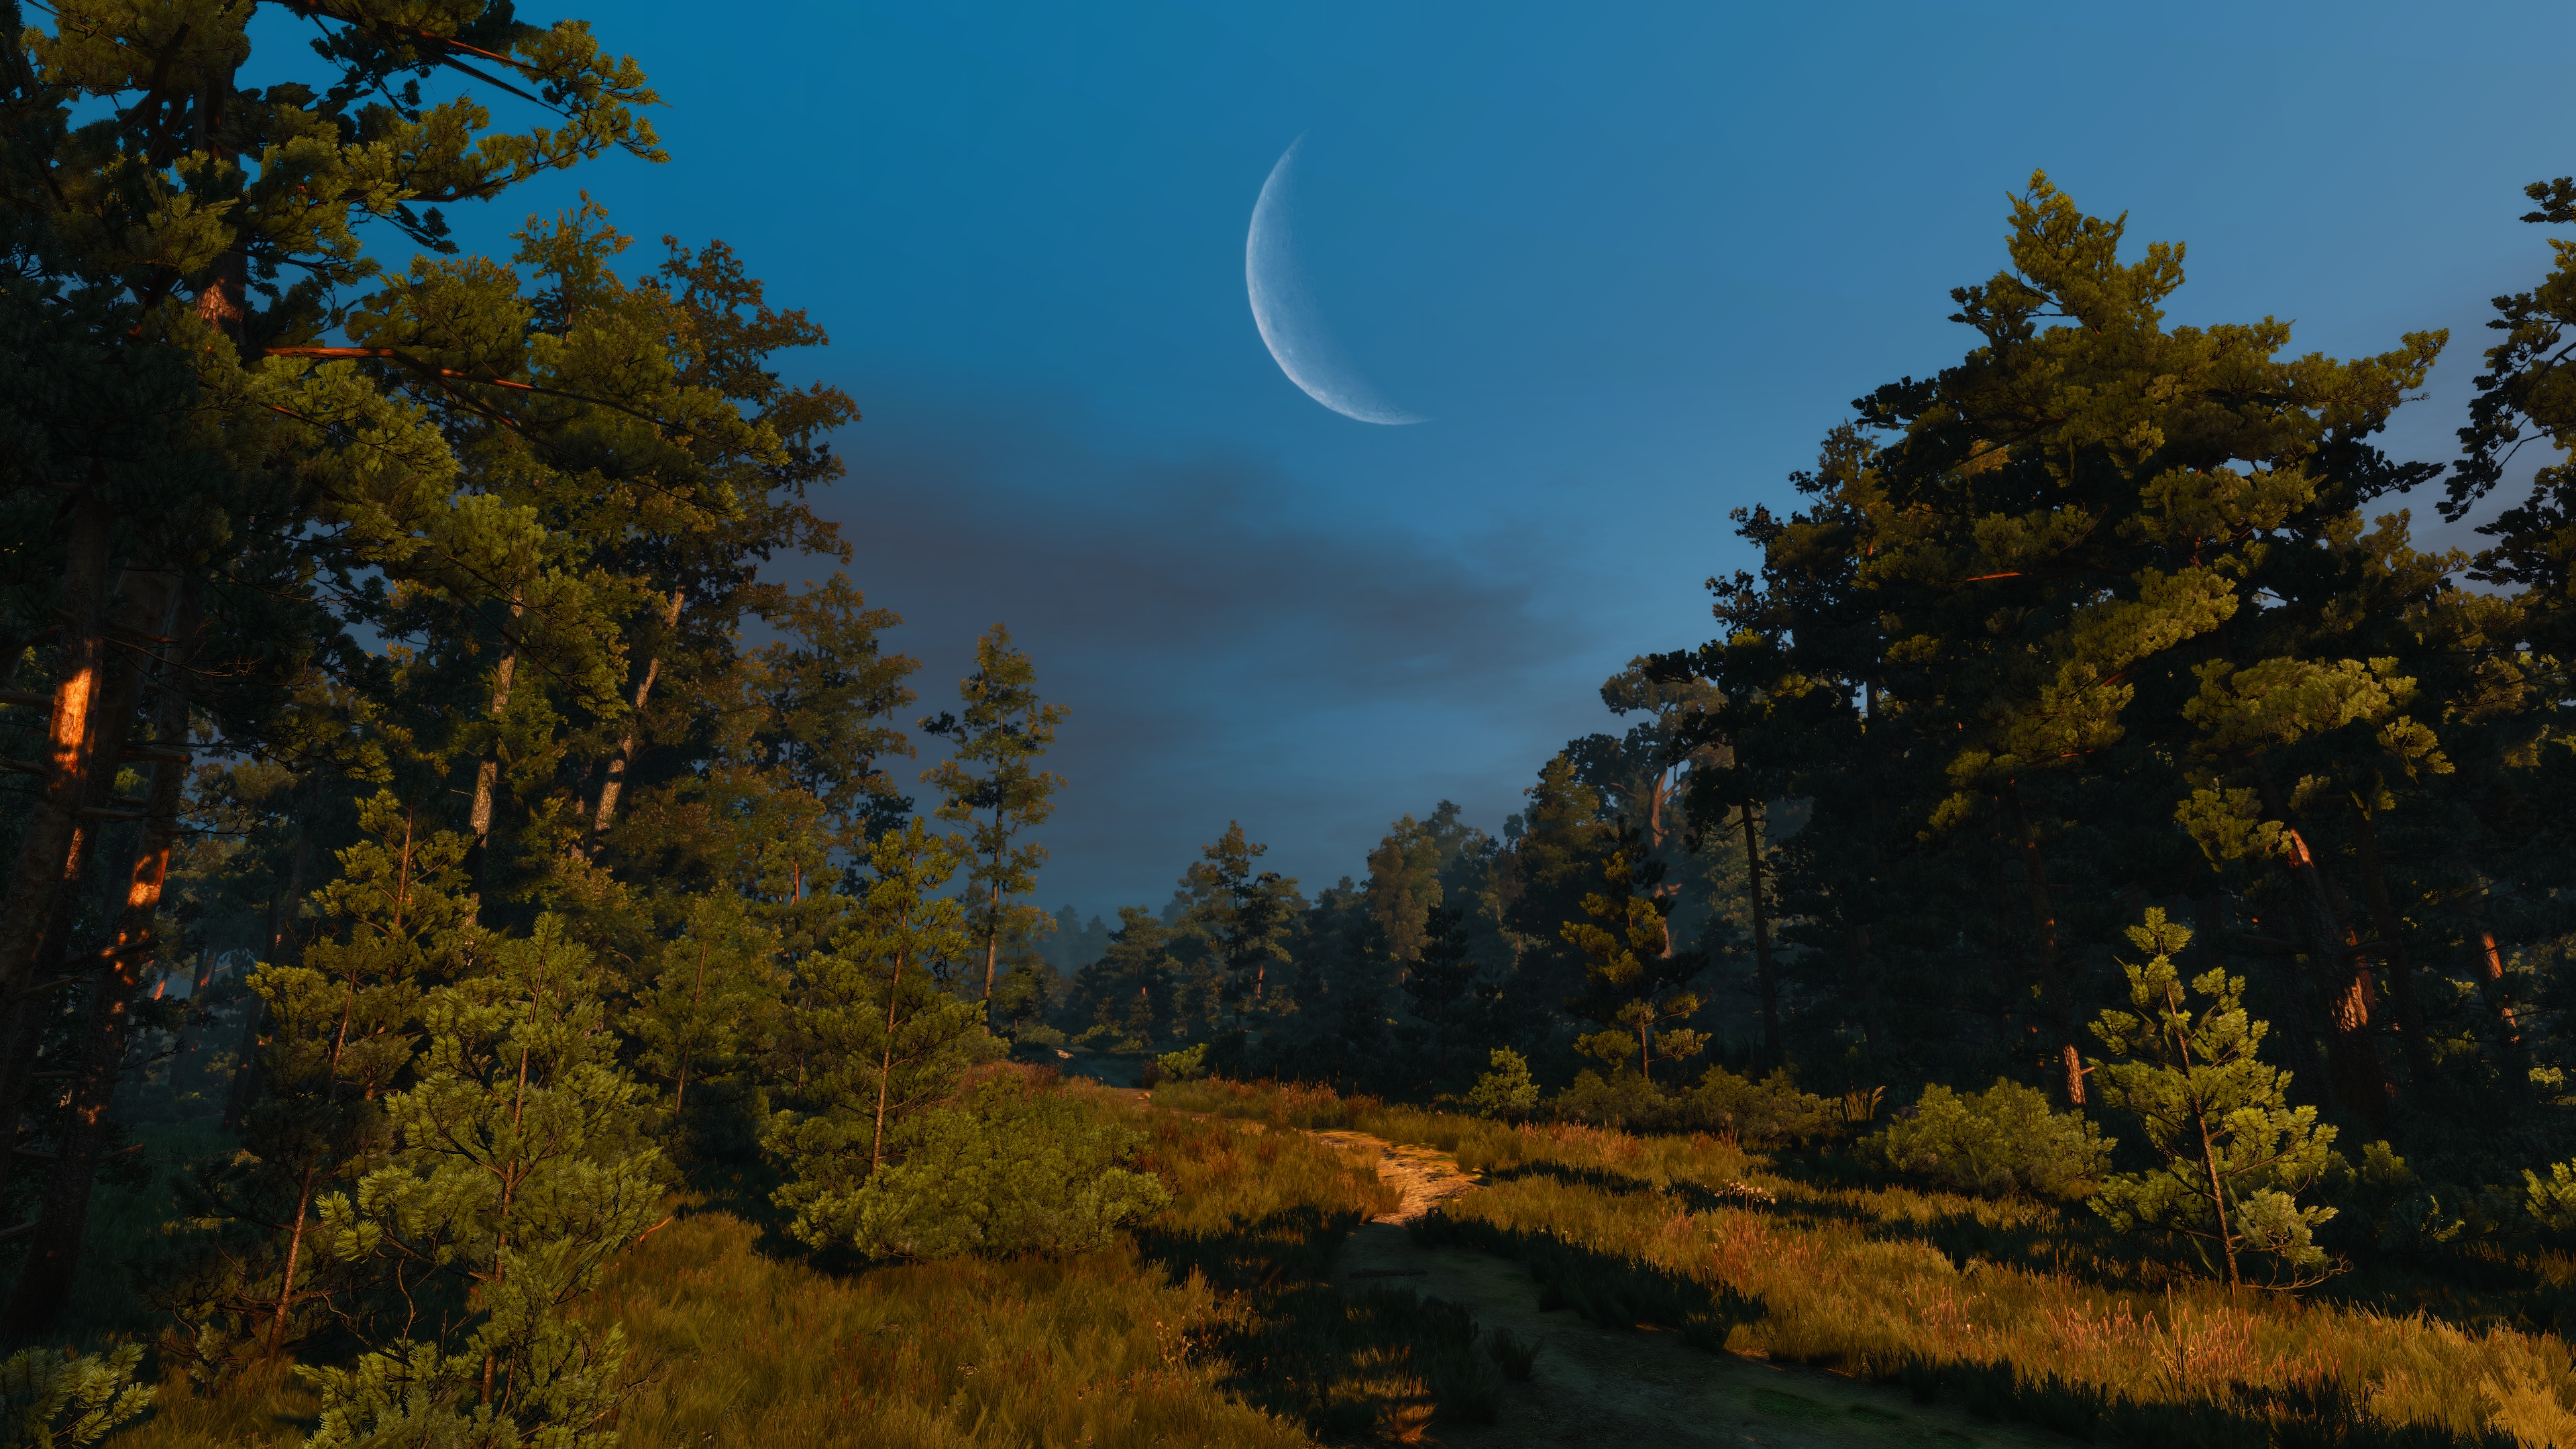 General 3840x2160 The Witcher 3: Wild Hunt PC gaming screen shot forest evening sky video game art Moon video games nature CGI trees grass plants